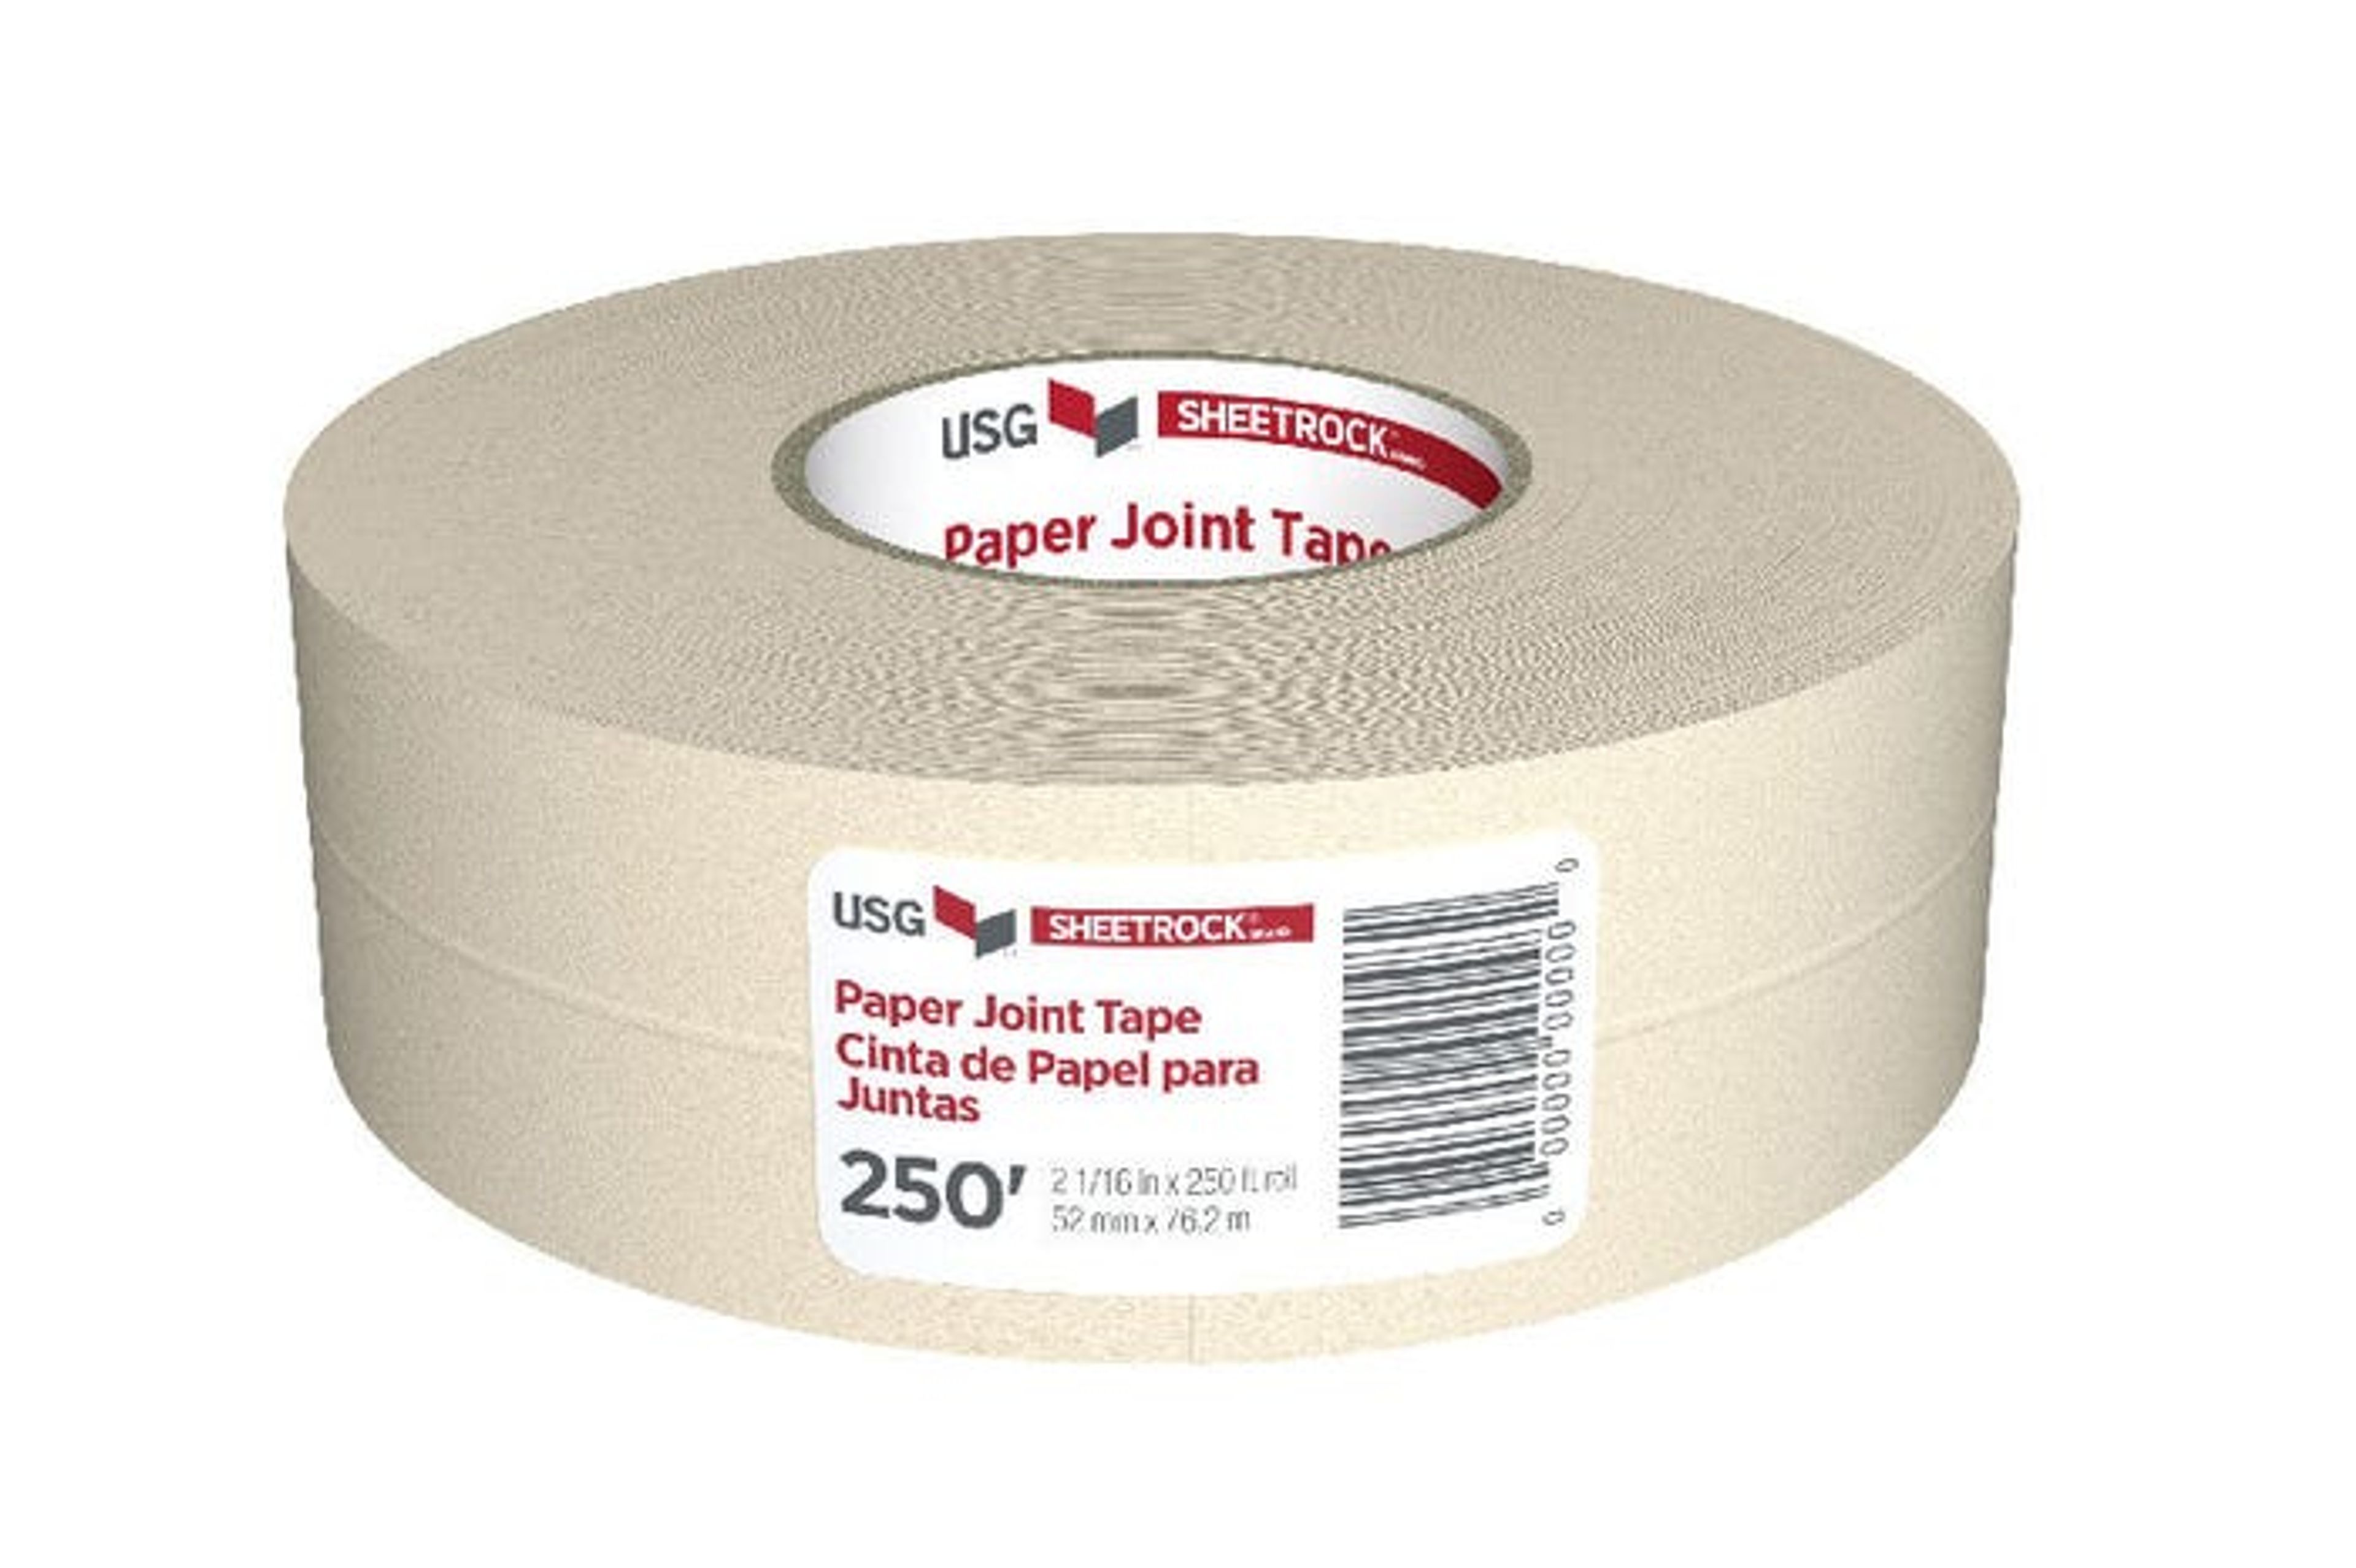 Plaster Jointing Tapes